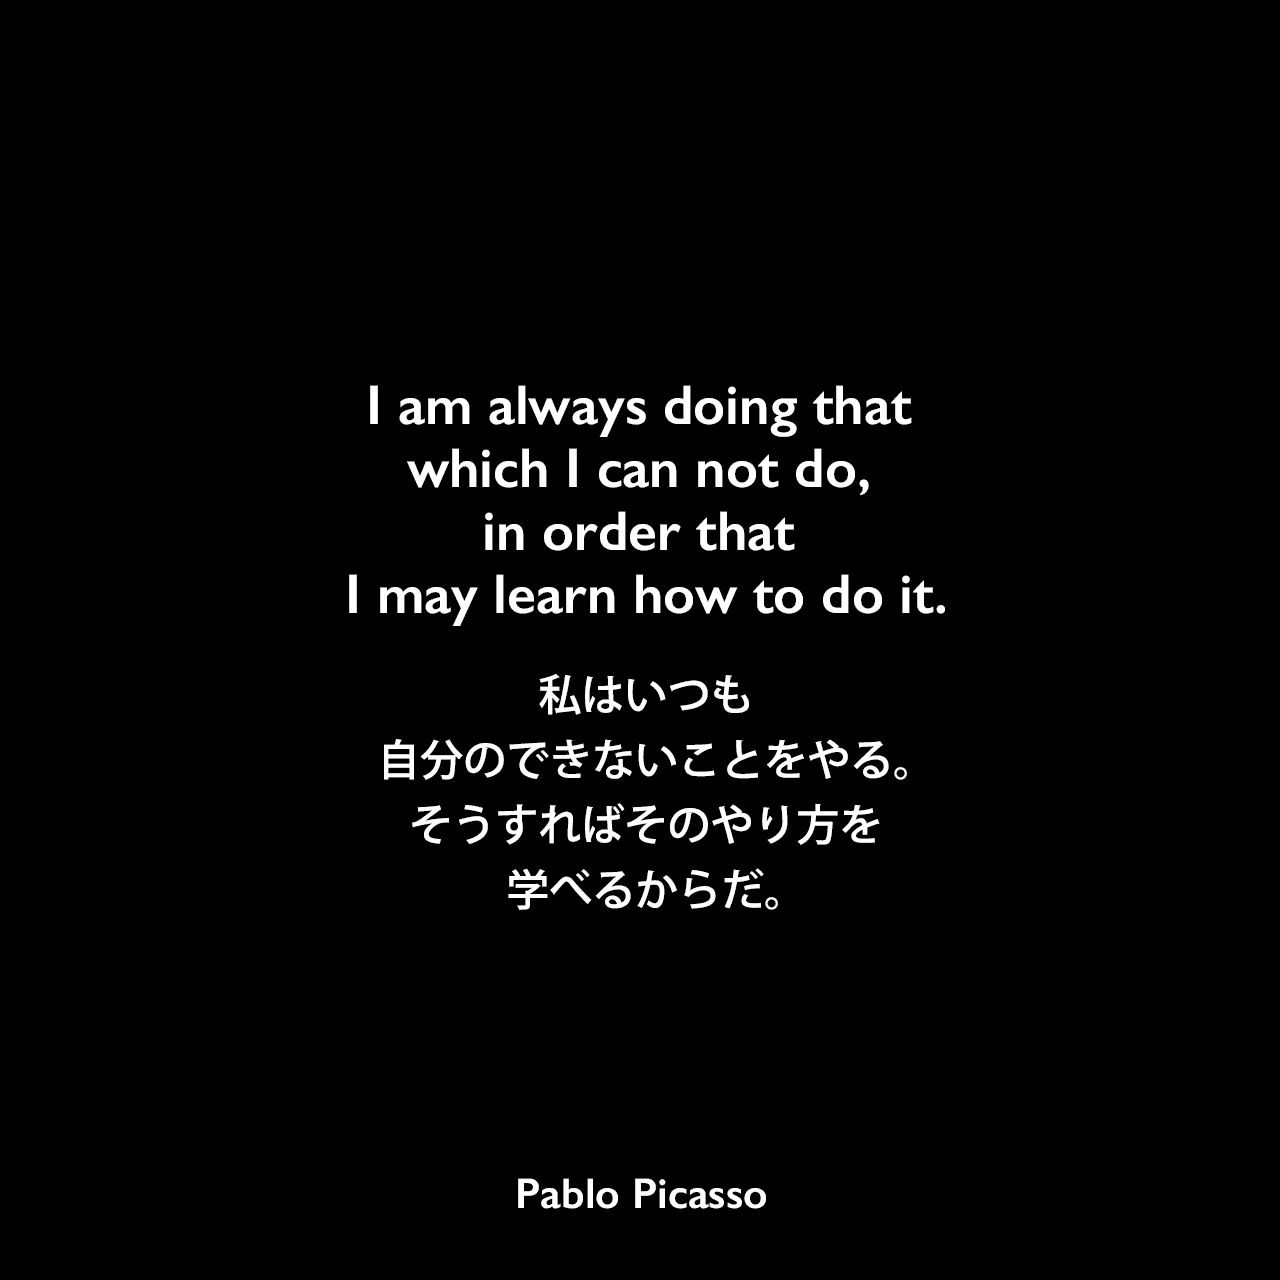 I am always doing that which I can not do, in order that I may learn how to do it.私はいつも自分のできないことをやる。そうすればそのやり方を学べるからだ。Pablo Picasso